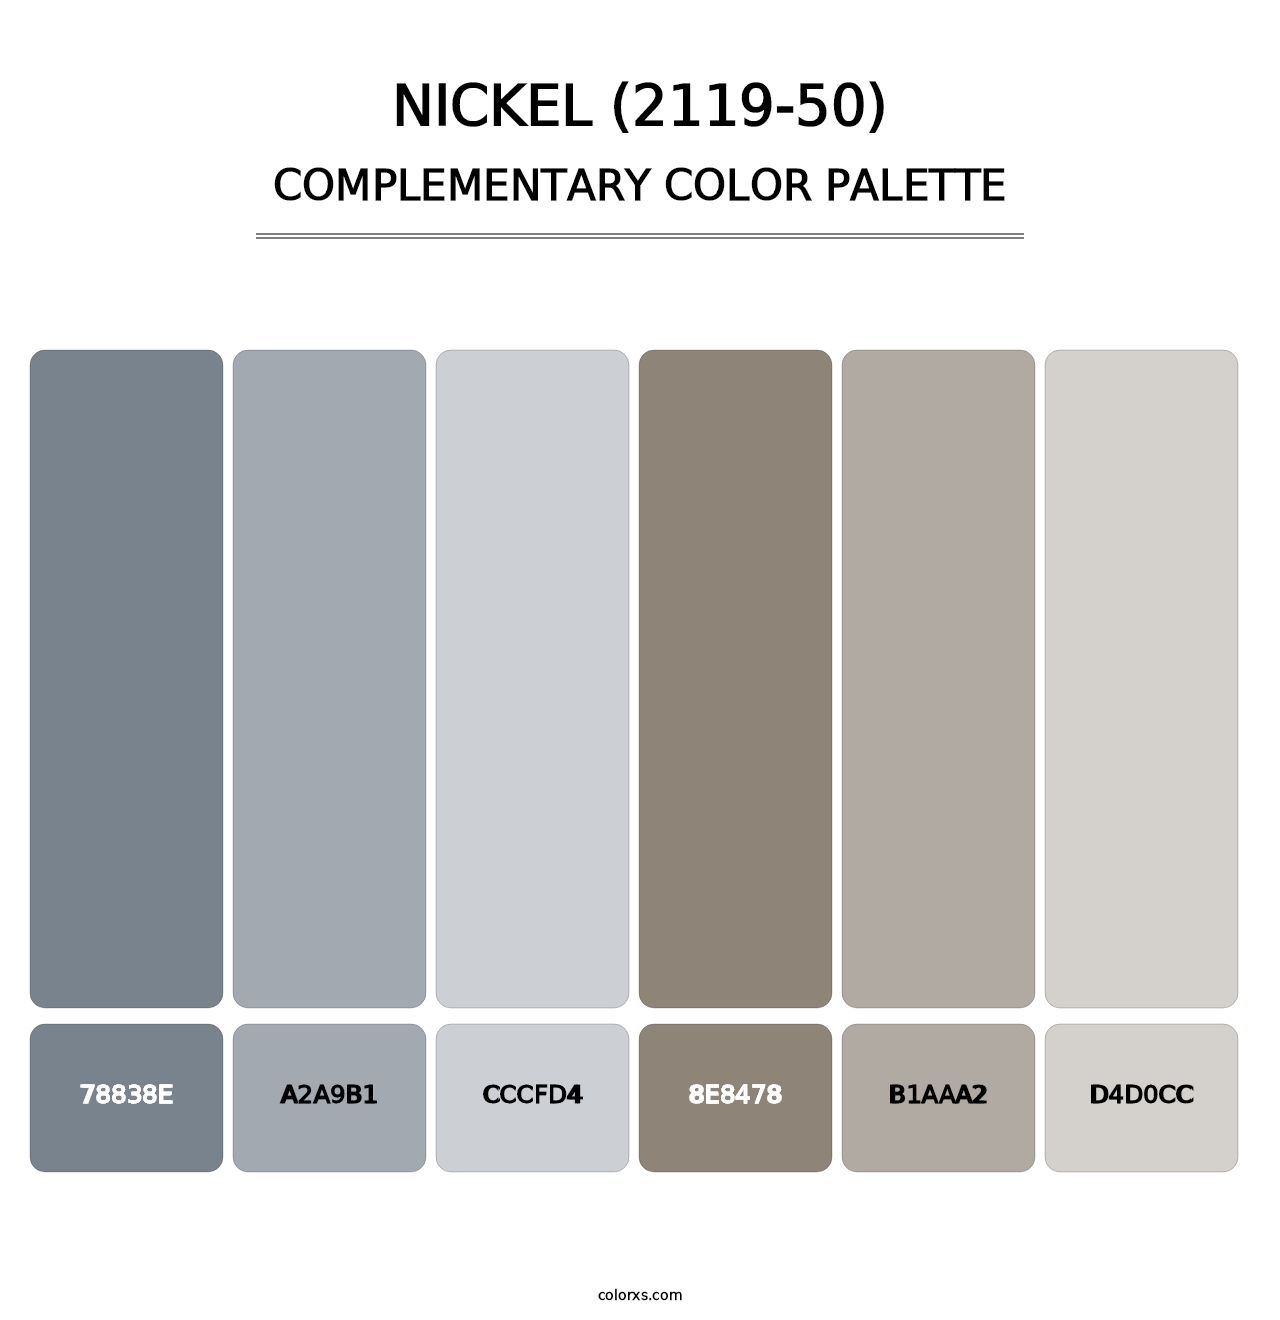 Nickel (2119-50) - Complementary Color Palette